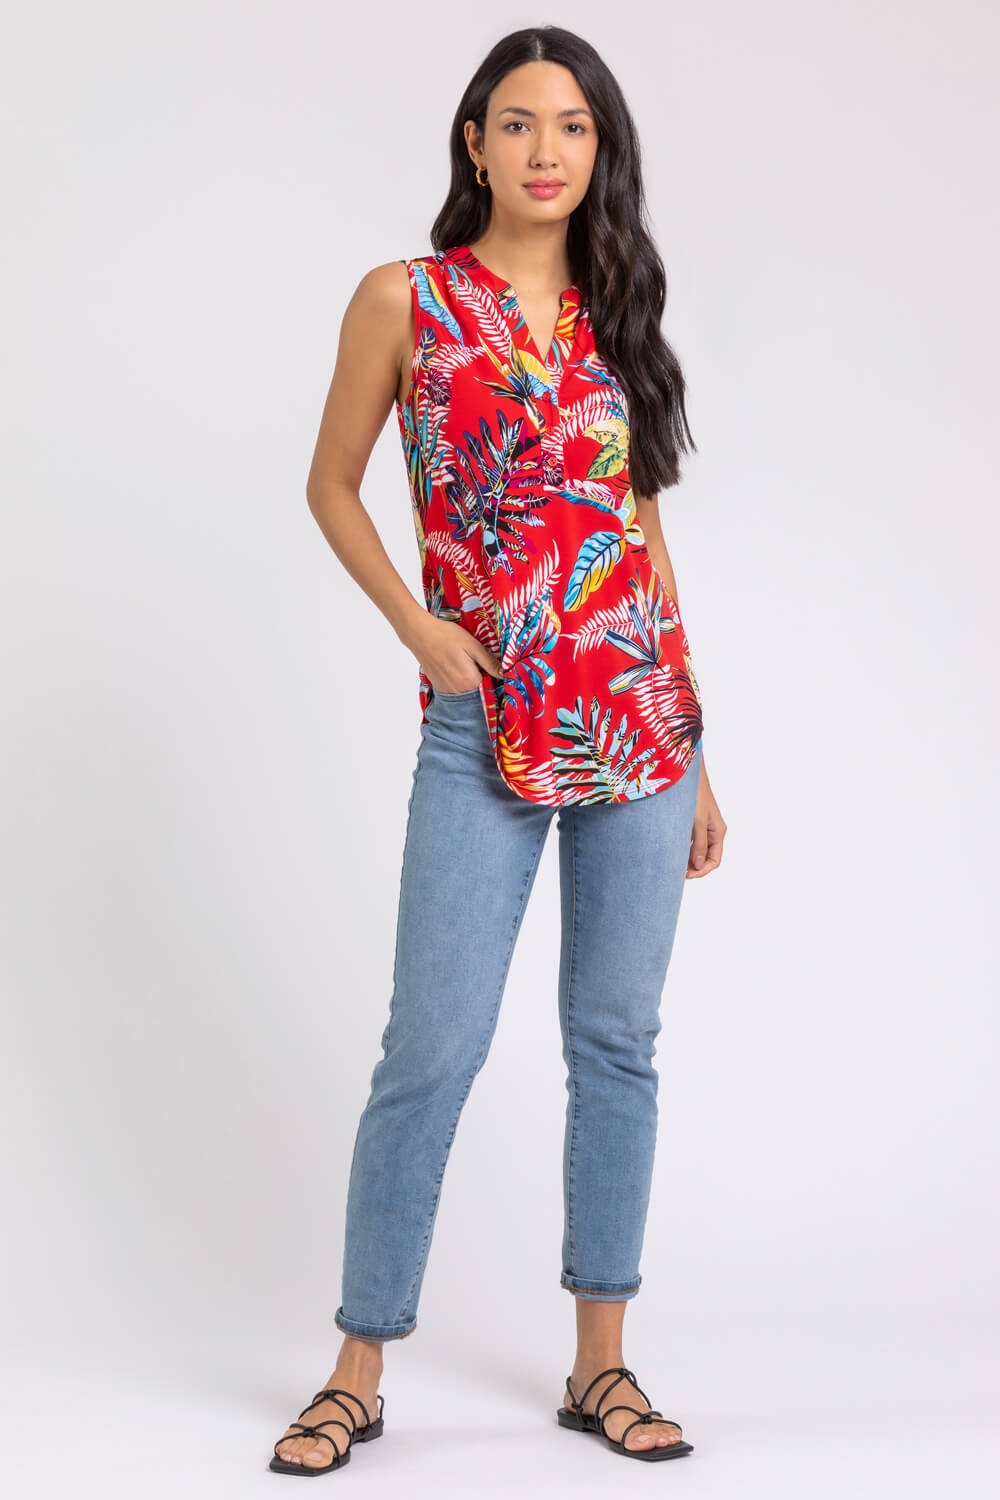 Red Tropical Print Stretch Jersey Top, Image 5 of 5